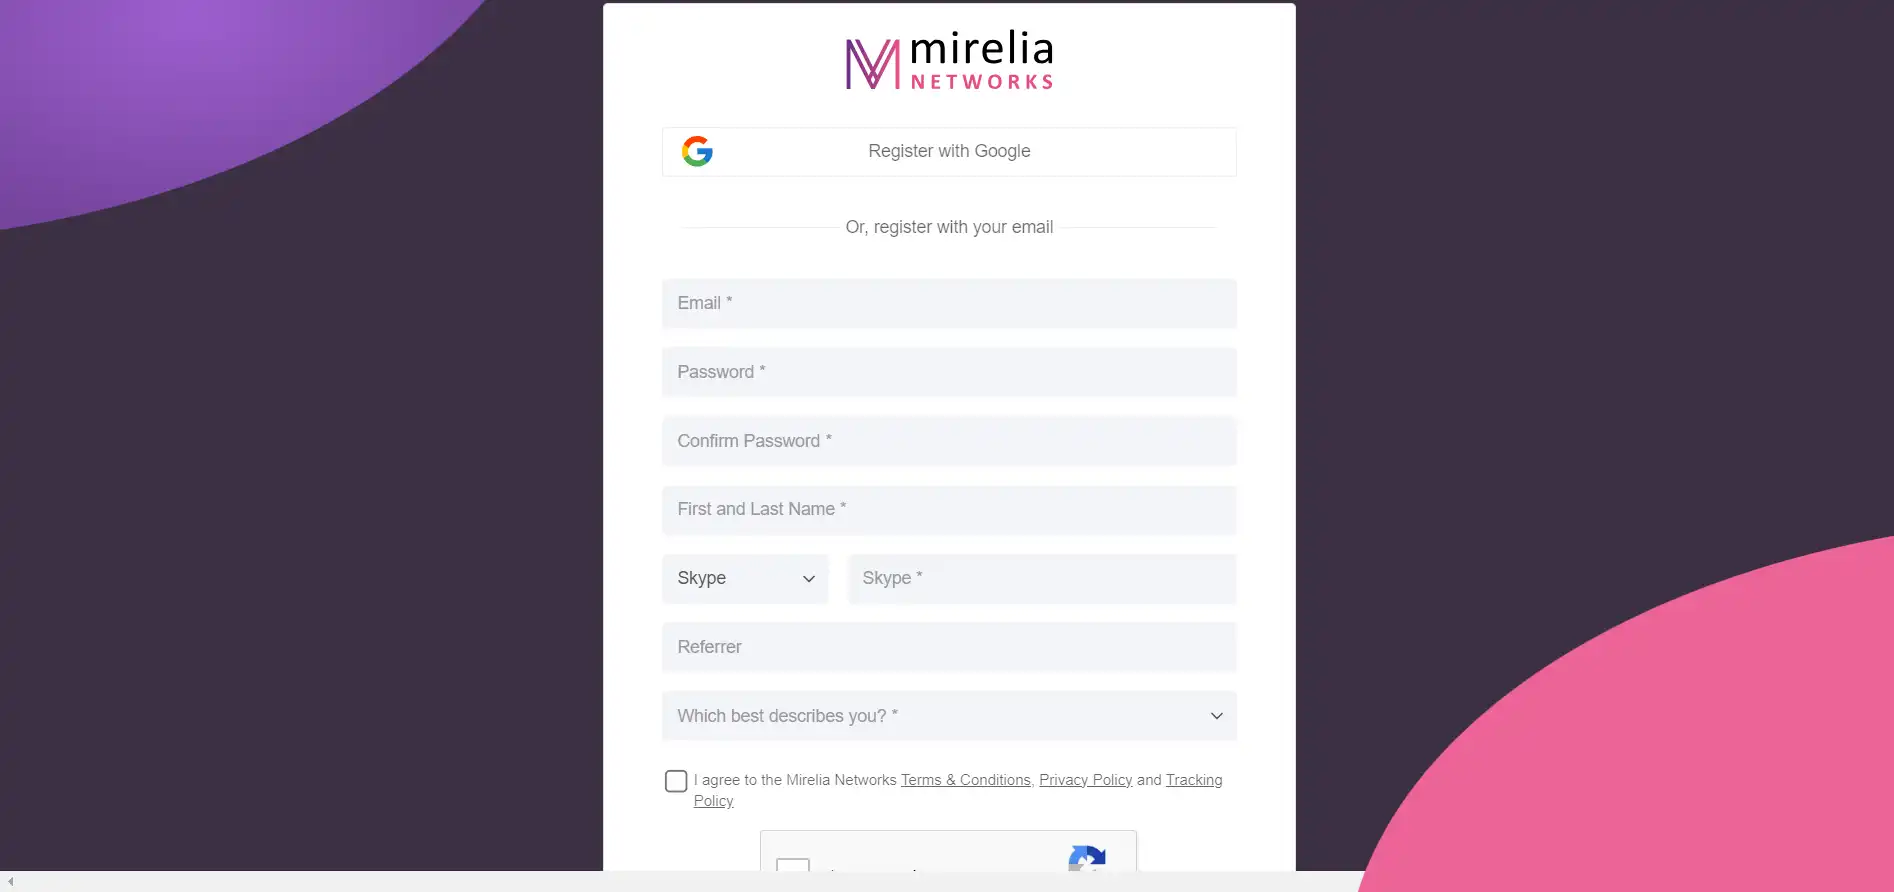 How to get started with Mirelia Networks